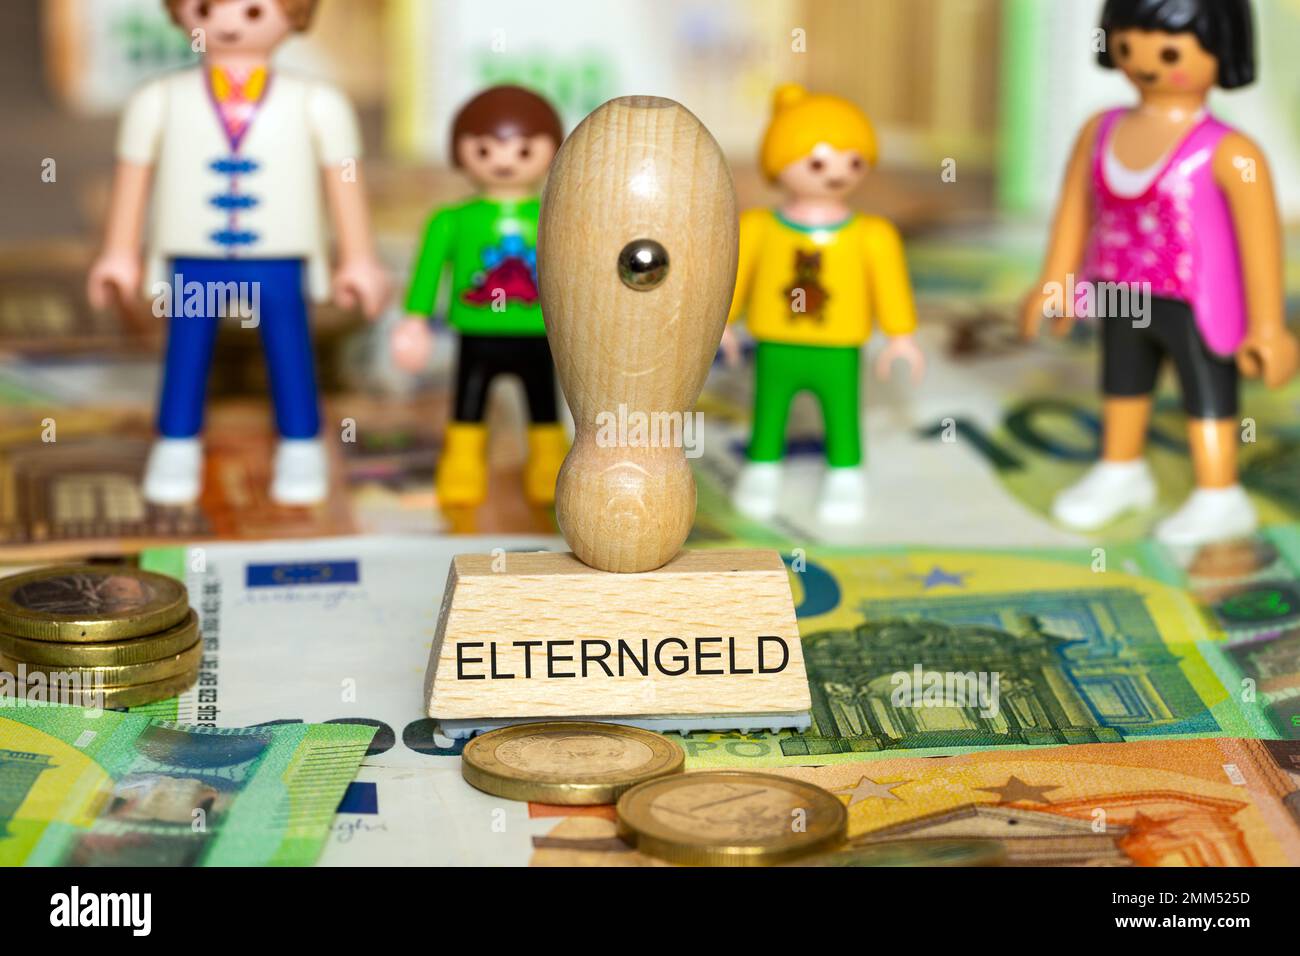 Symbol image of parental allowance: Euro banknotes, game pieces and a stamp with the word Elterngeld (parental allowance) on it Stock Photo